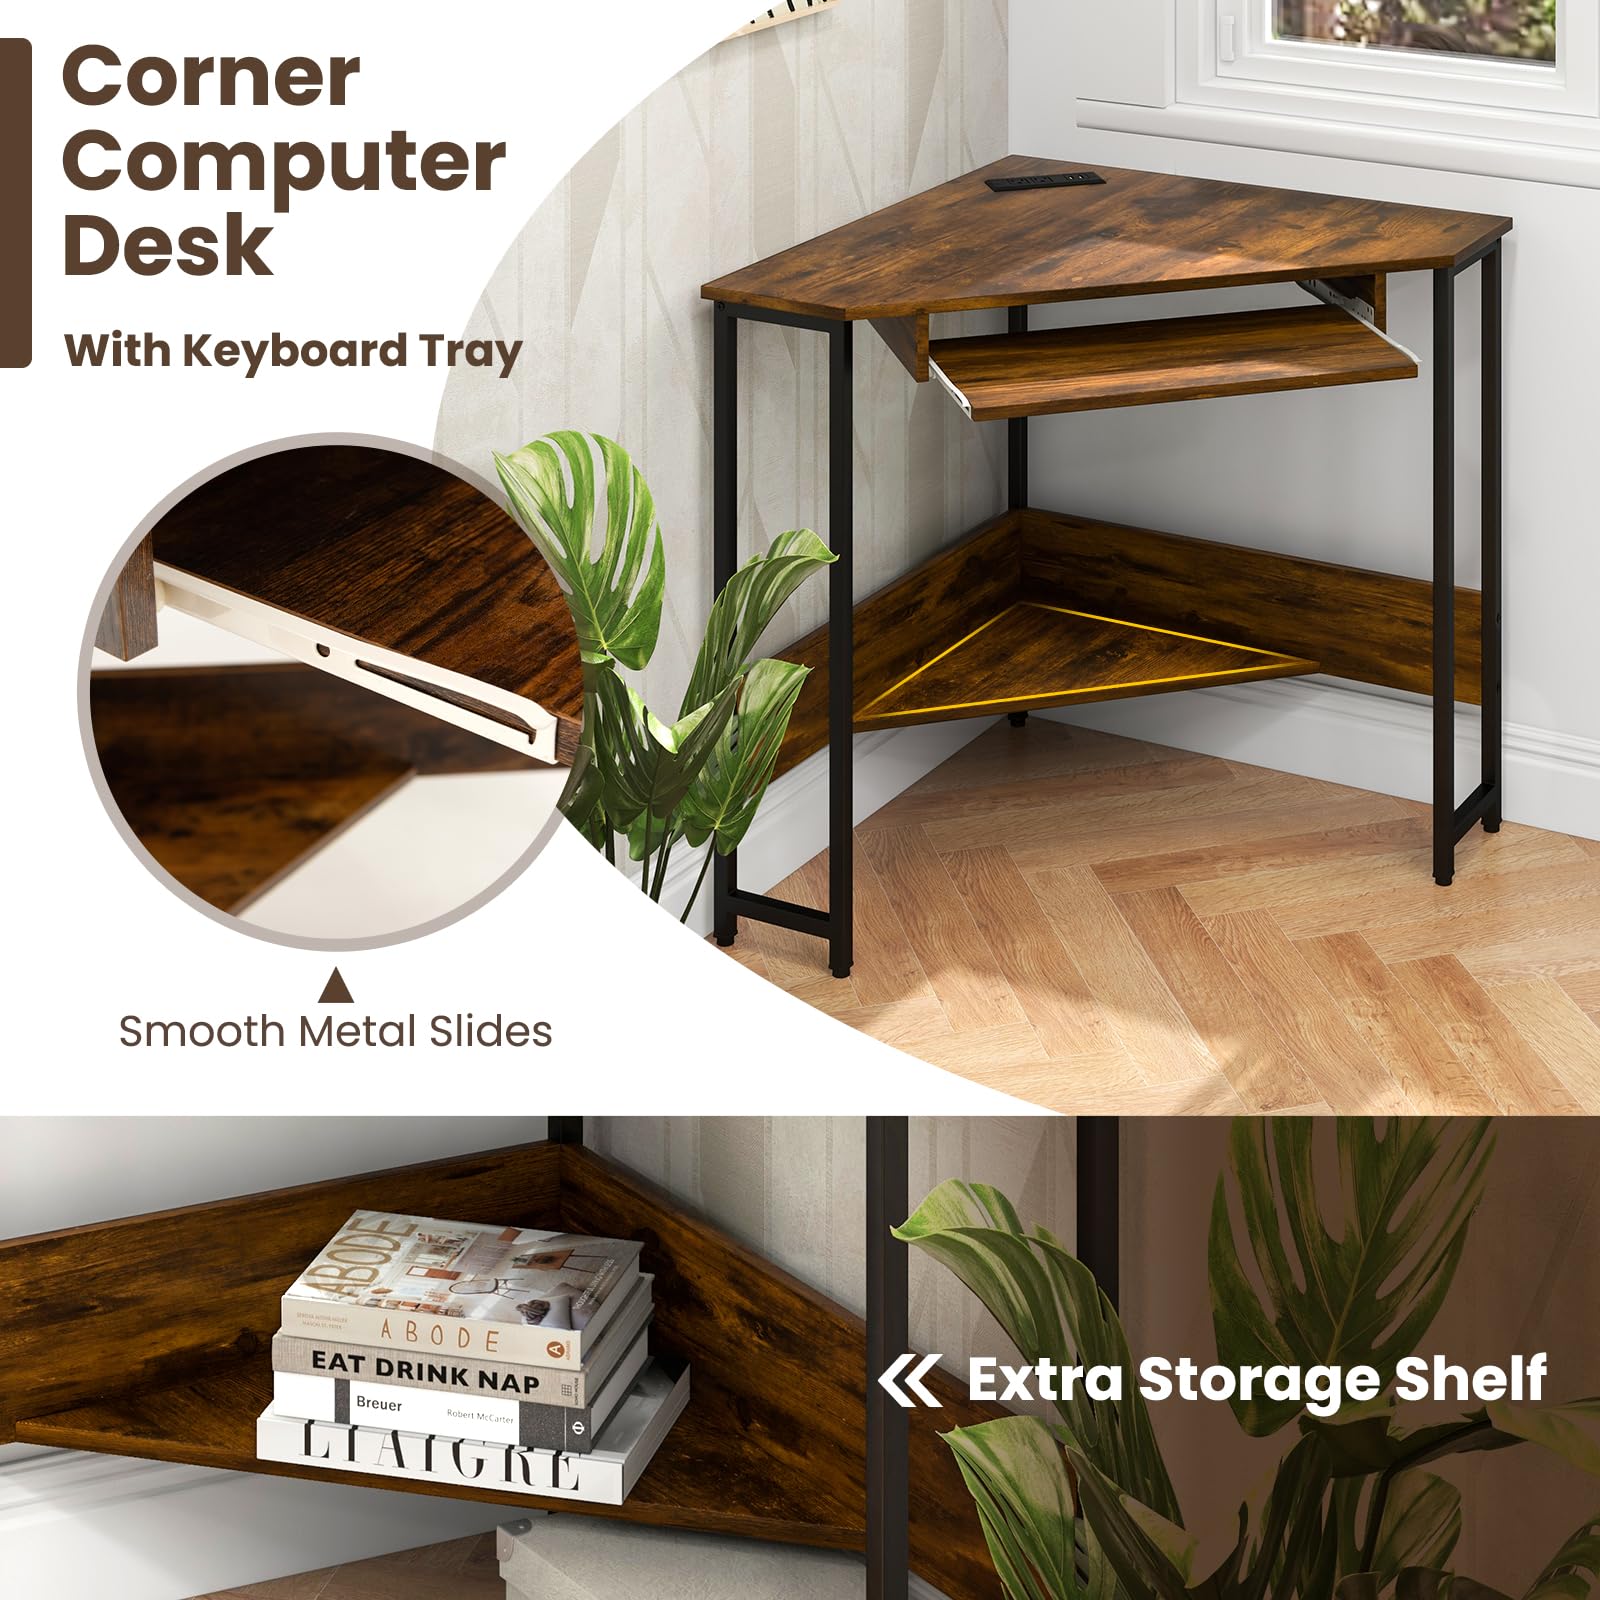 IFANNY Corner Computer Desk with Keyboard Tray, Wooden Triangle Desk w/Power Outlet & Storage Shelves, Rustic Corner Writing Desk, Small Corner Desks for Small Spaces